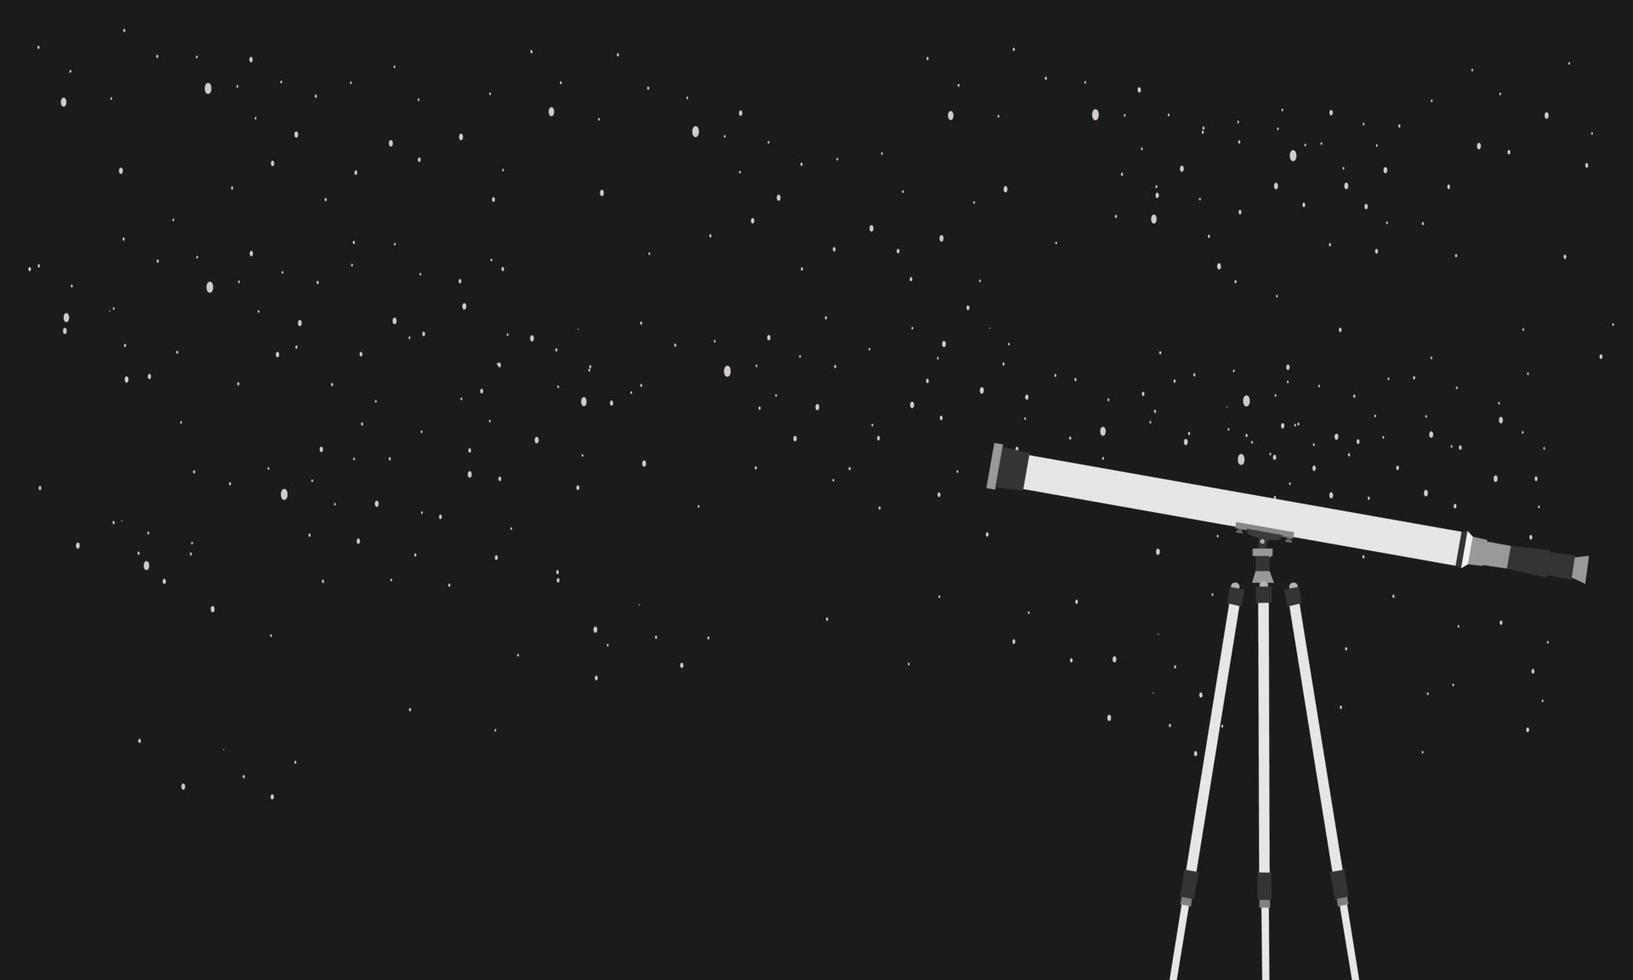 Education future concept vector flat illustration.Telescope stands on books against the background of the night sky